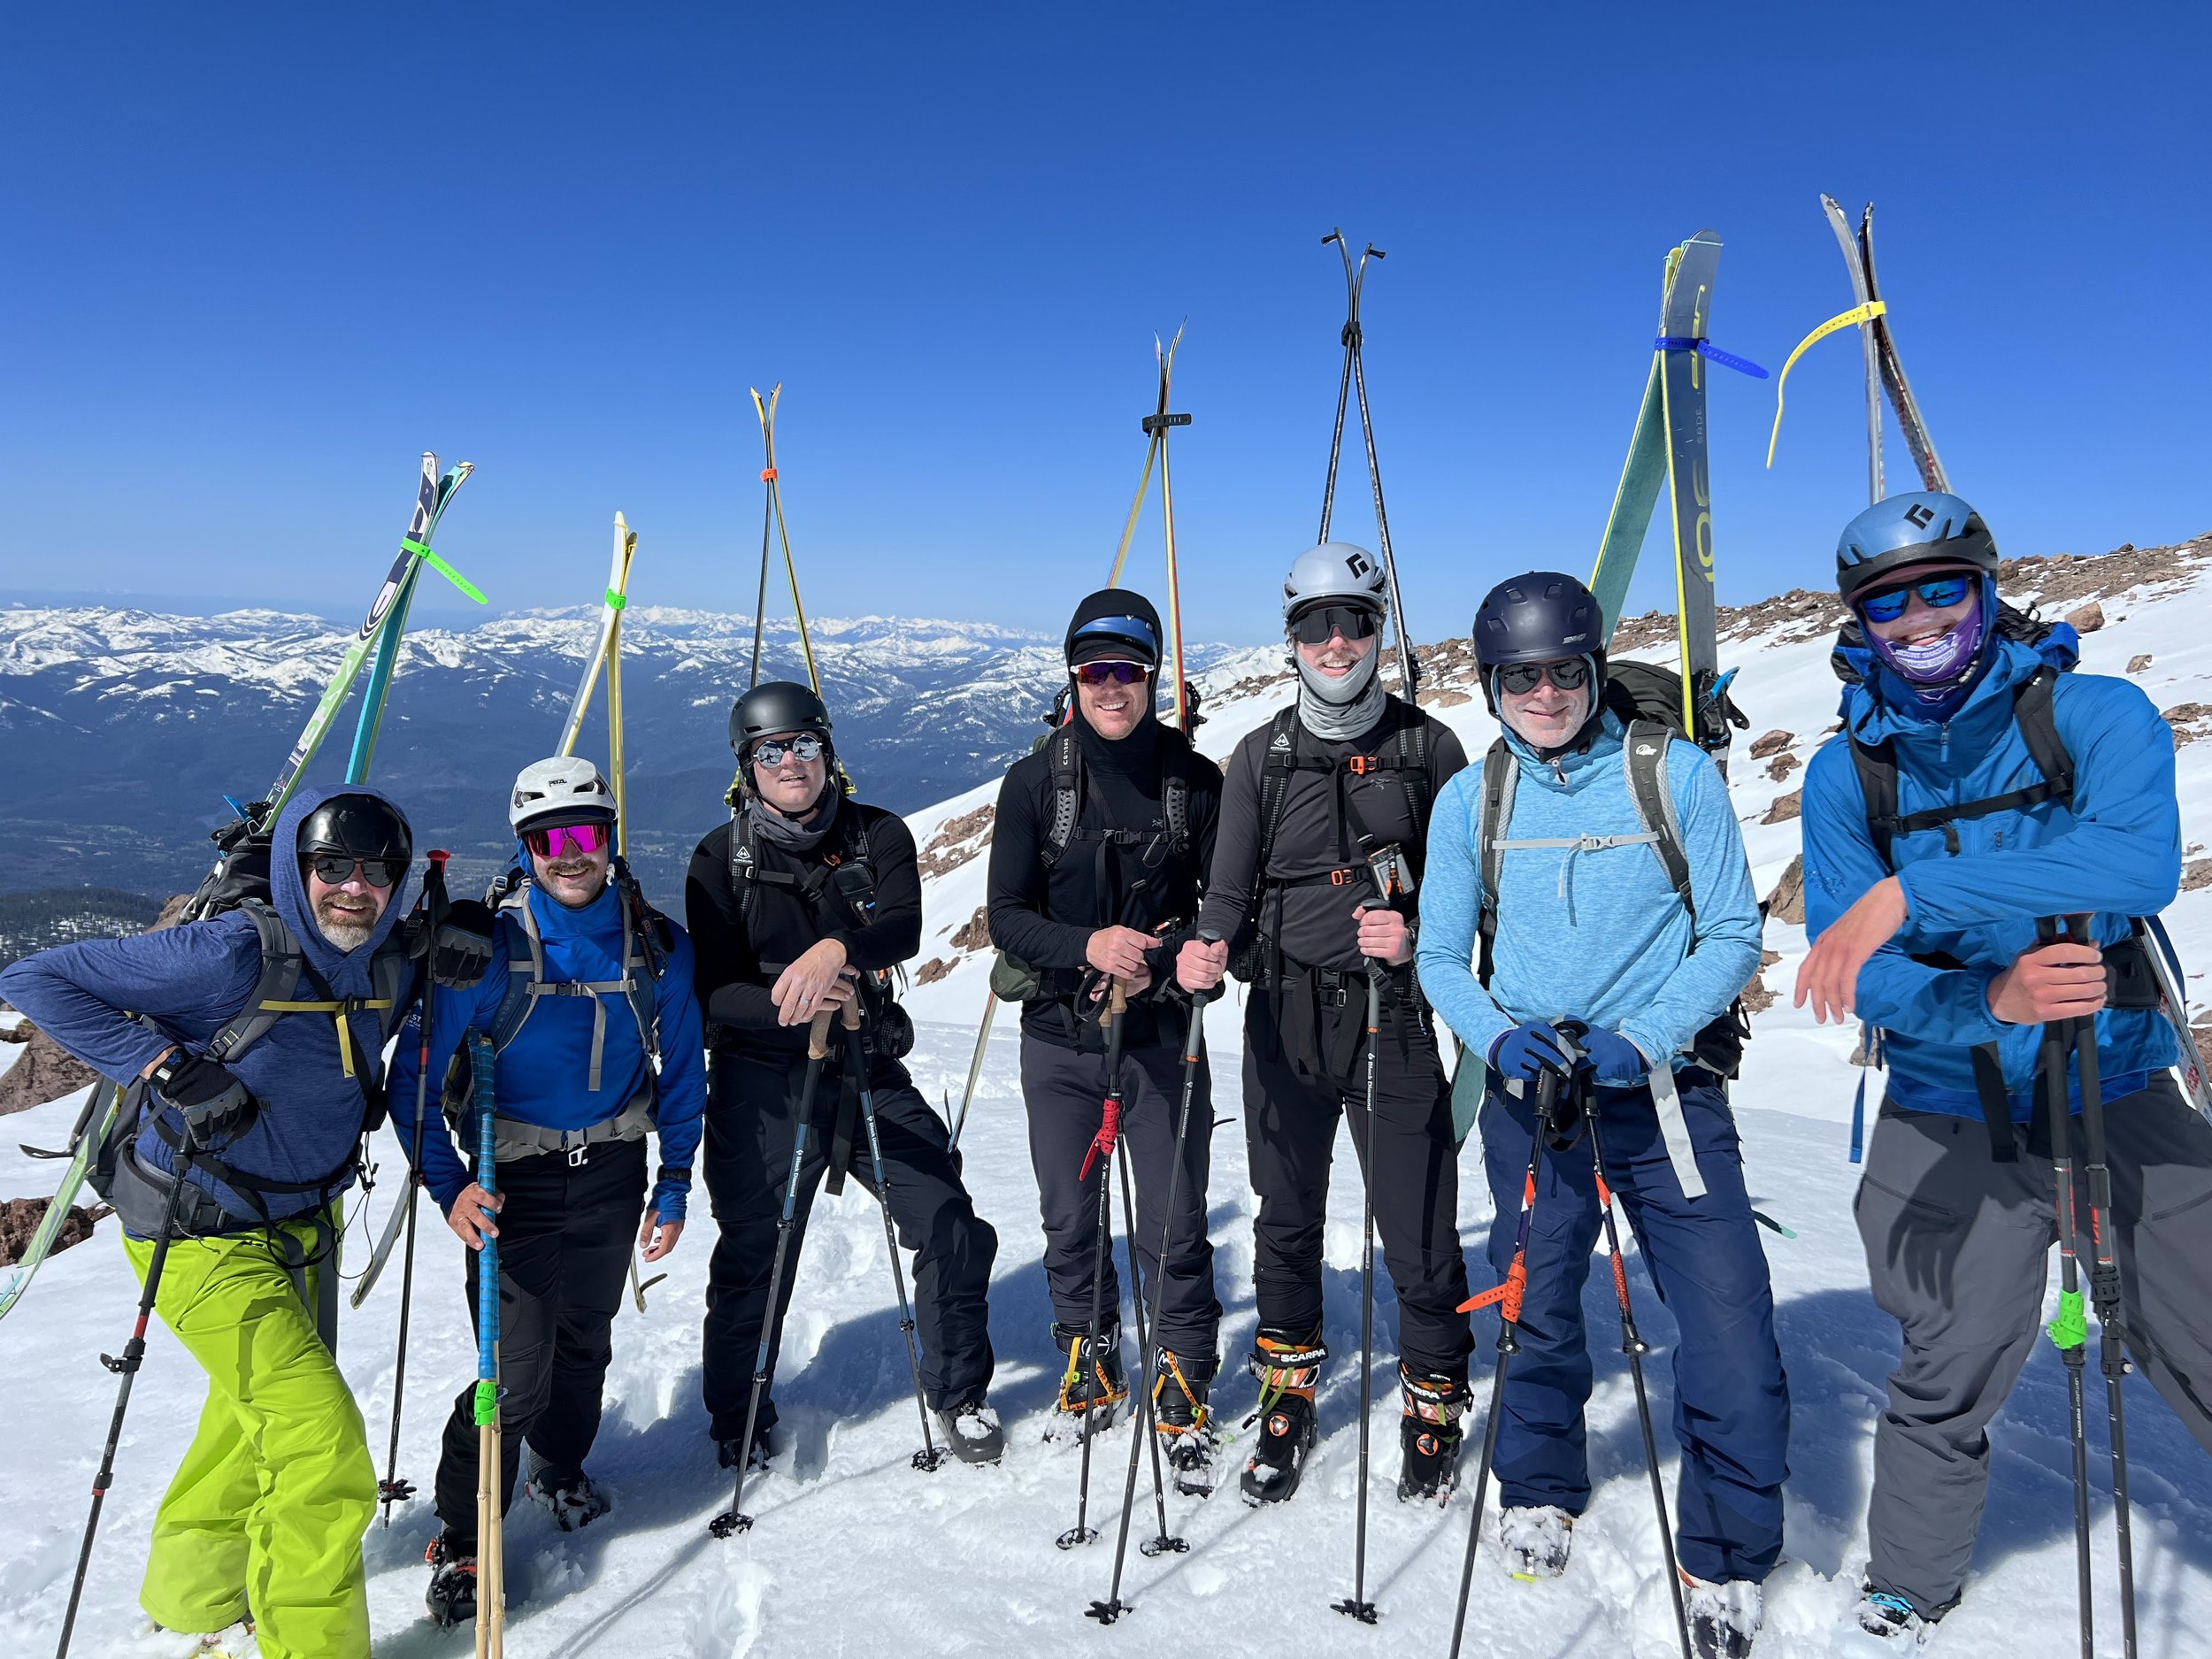 Group of skiers poses at the summit of mt shasta